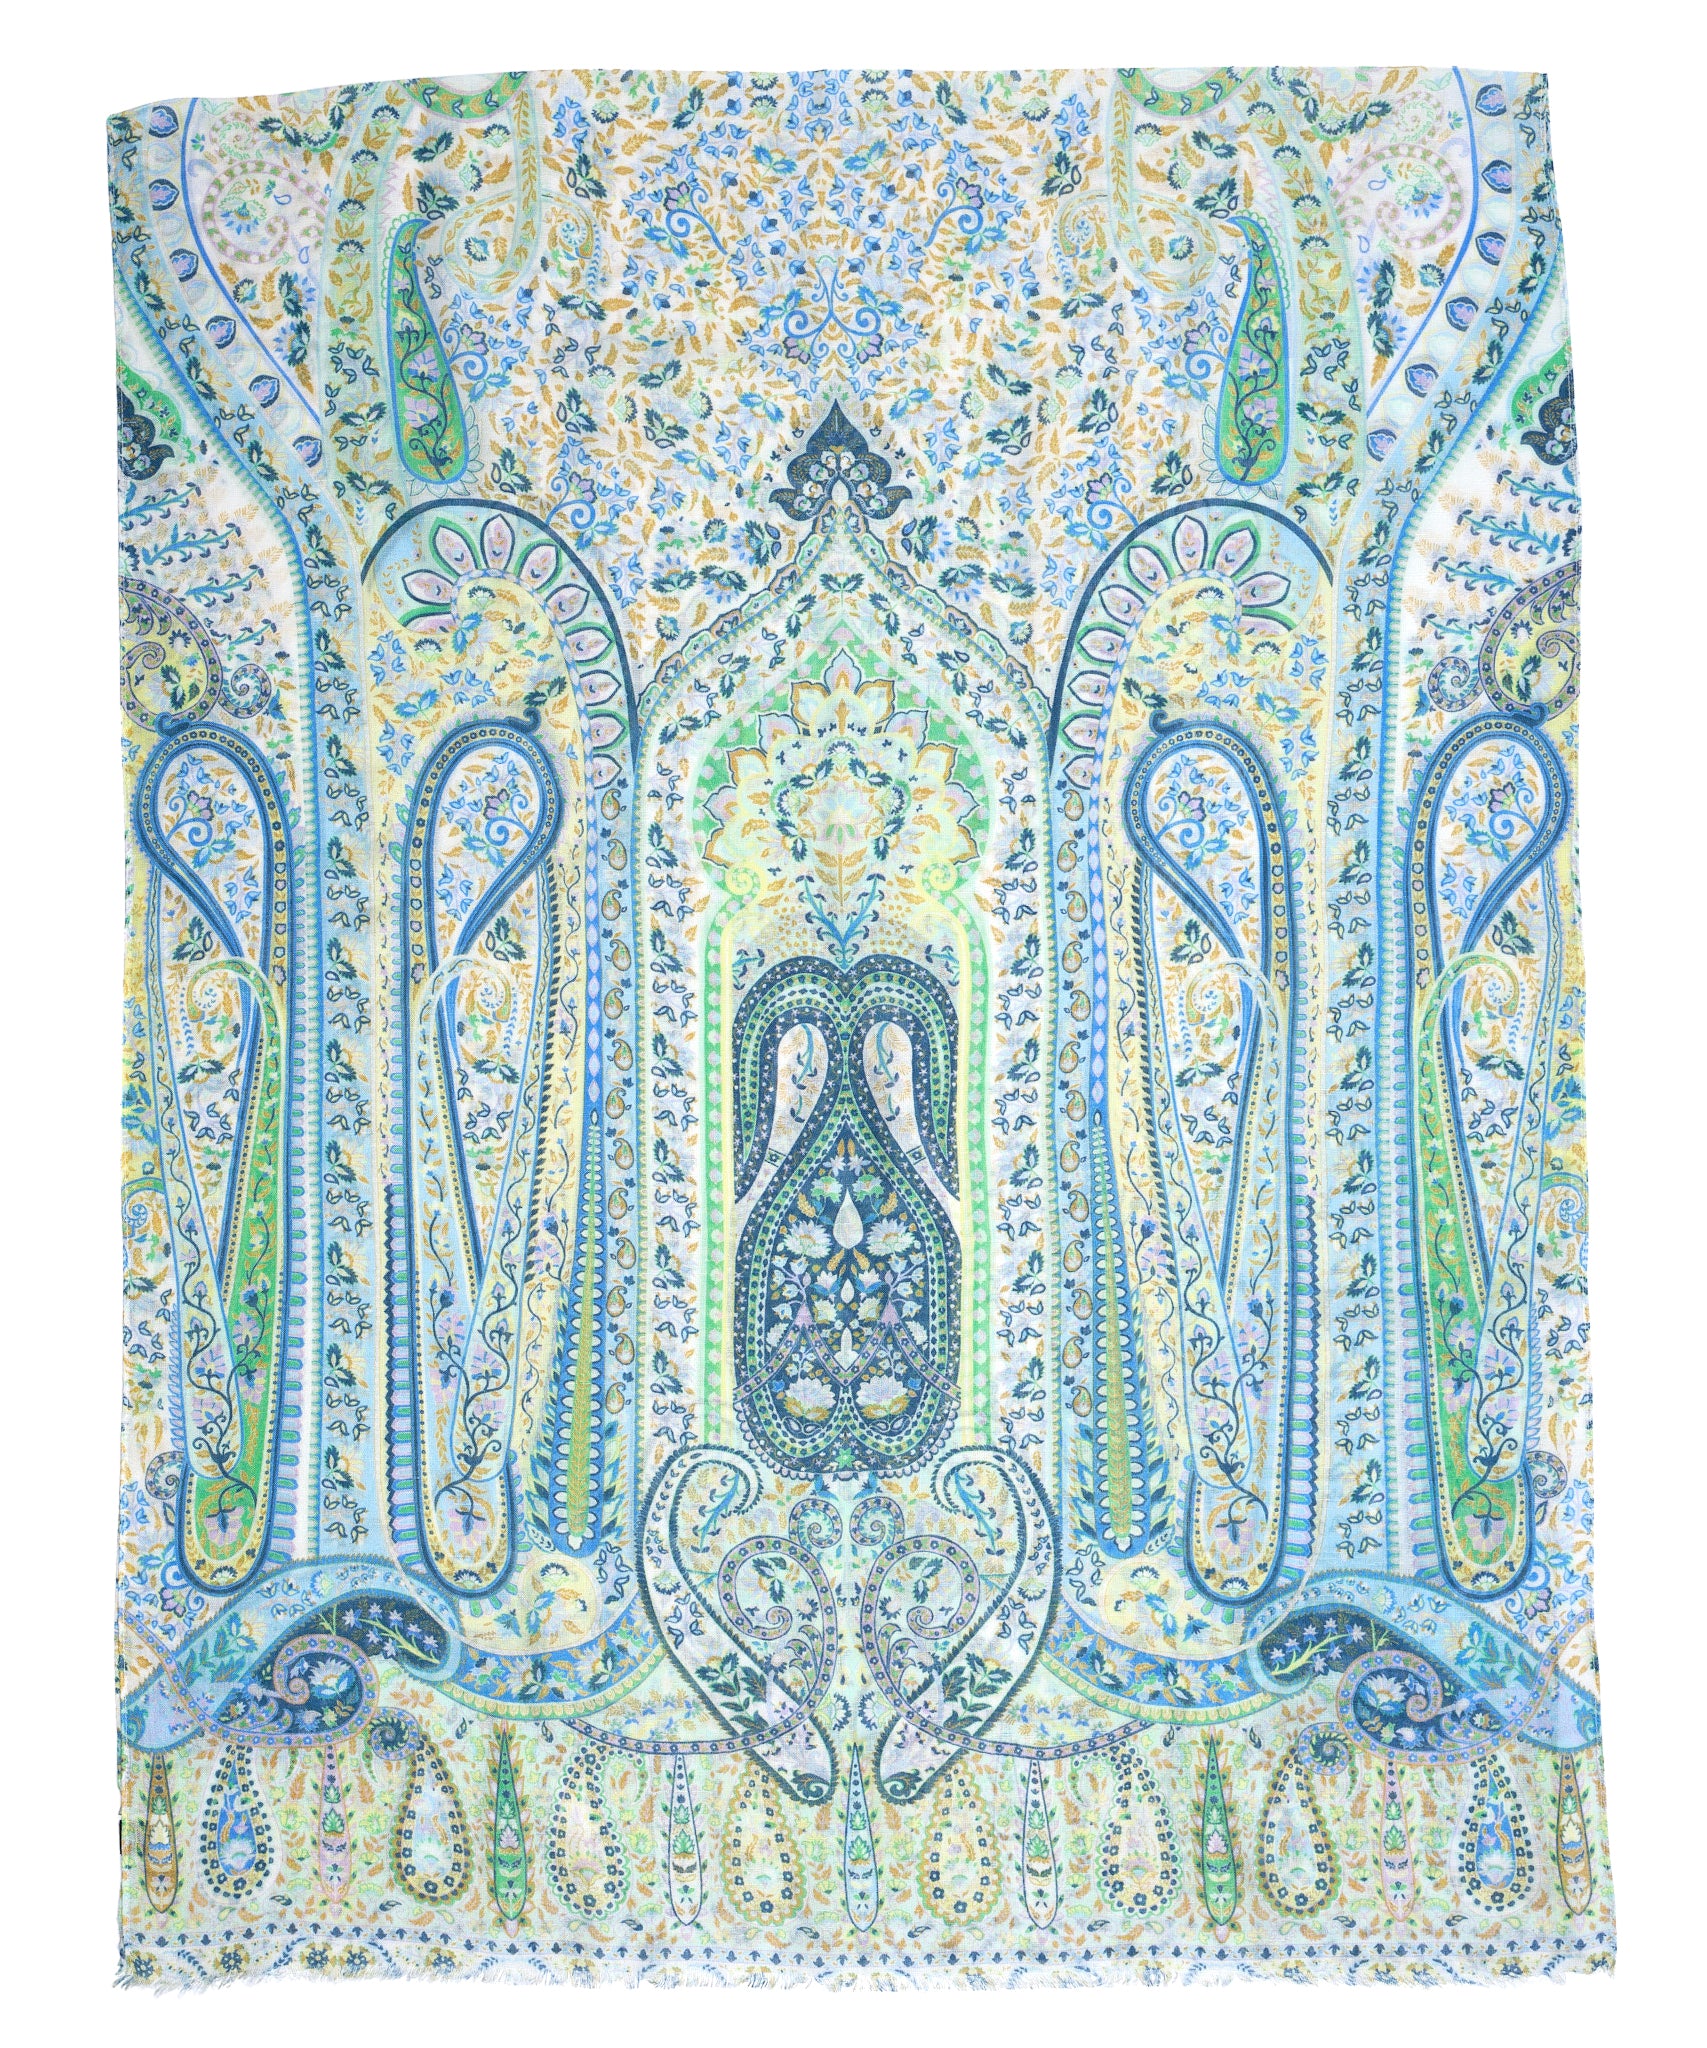 Palermo Paisley Wrap in color Sky Blue